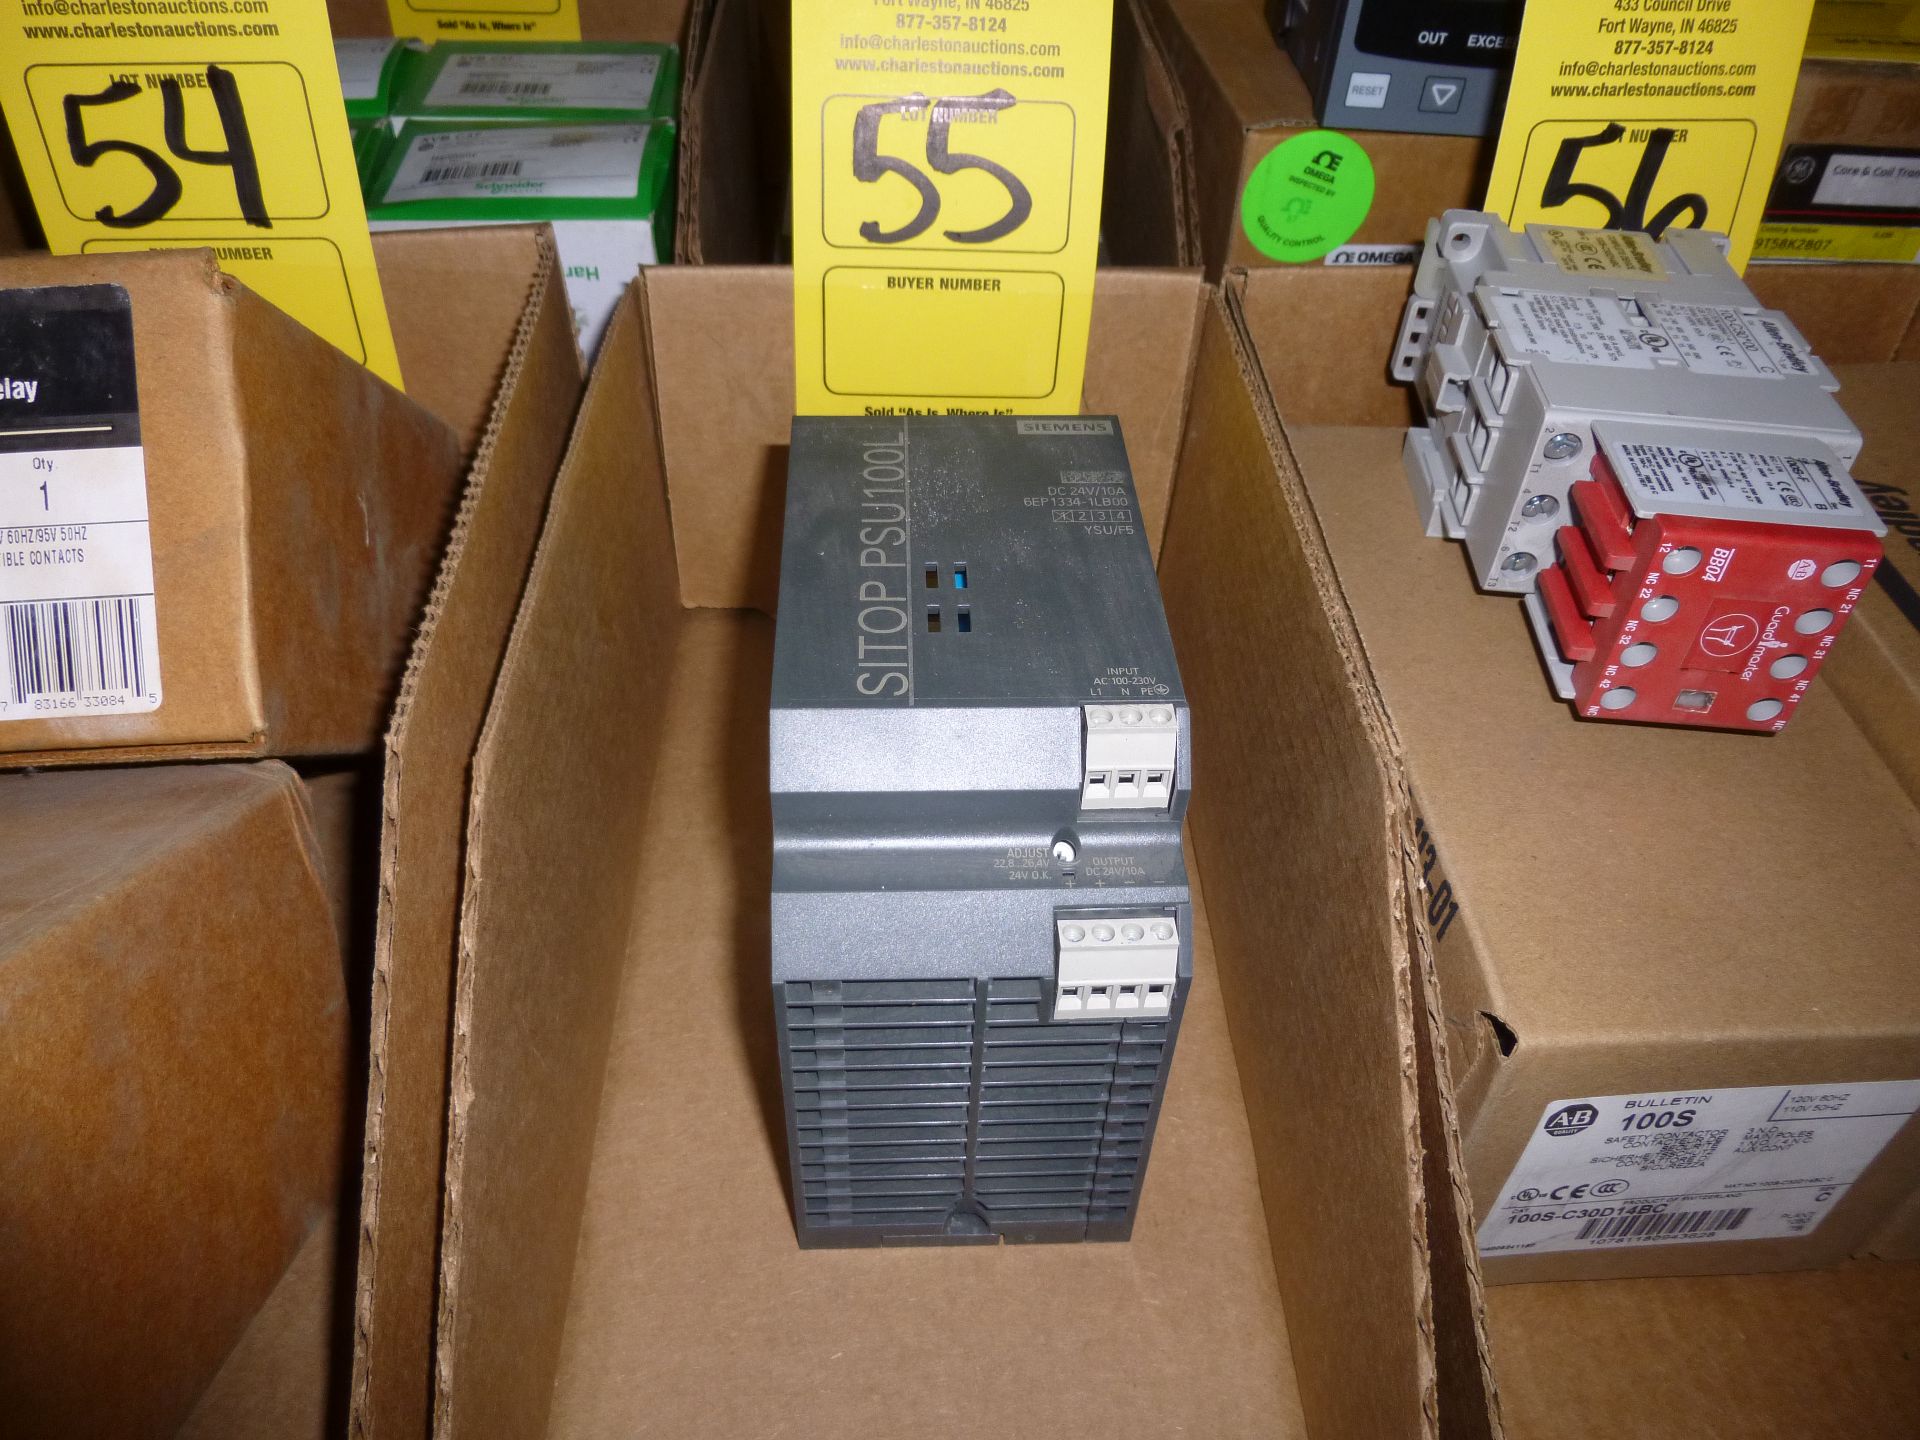 Siemens SiTOP power supply 6EP1334-1LB00, used, as always with Brolyn LLC auctions, all lots can